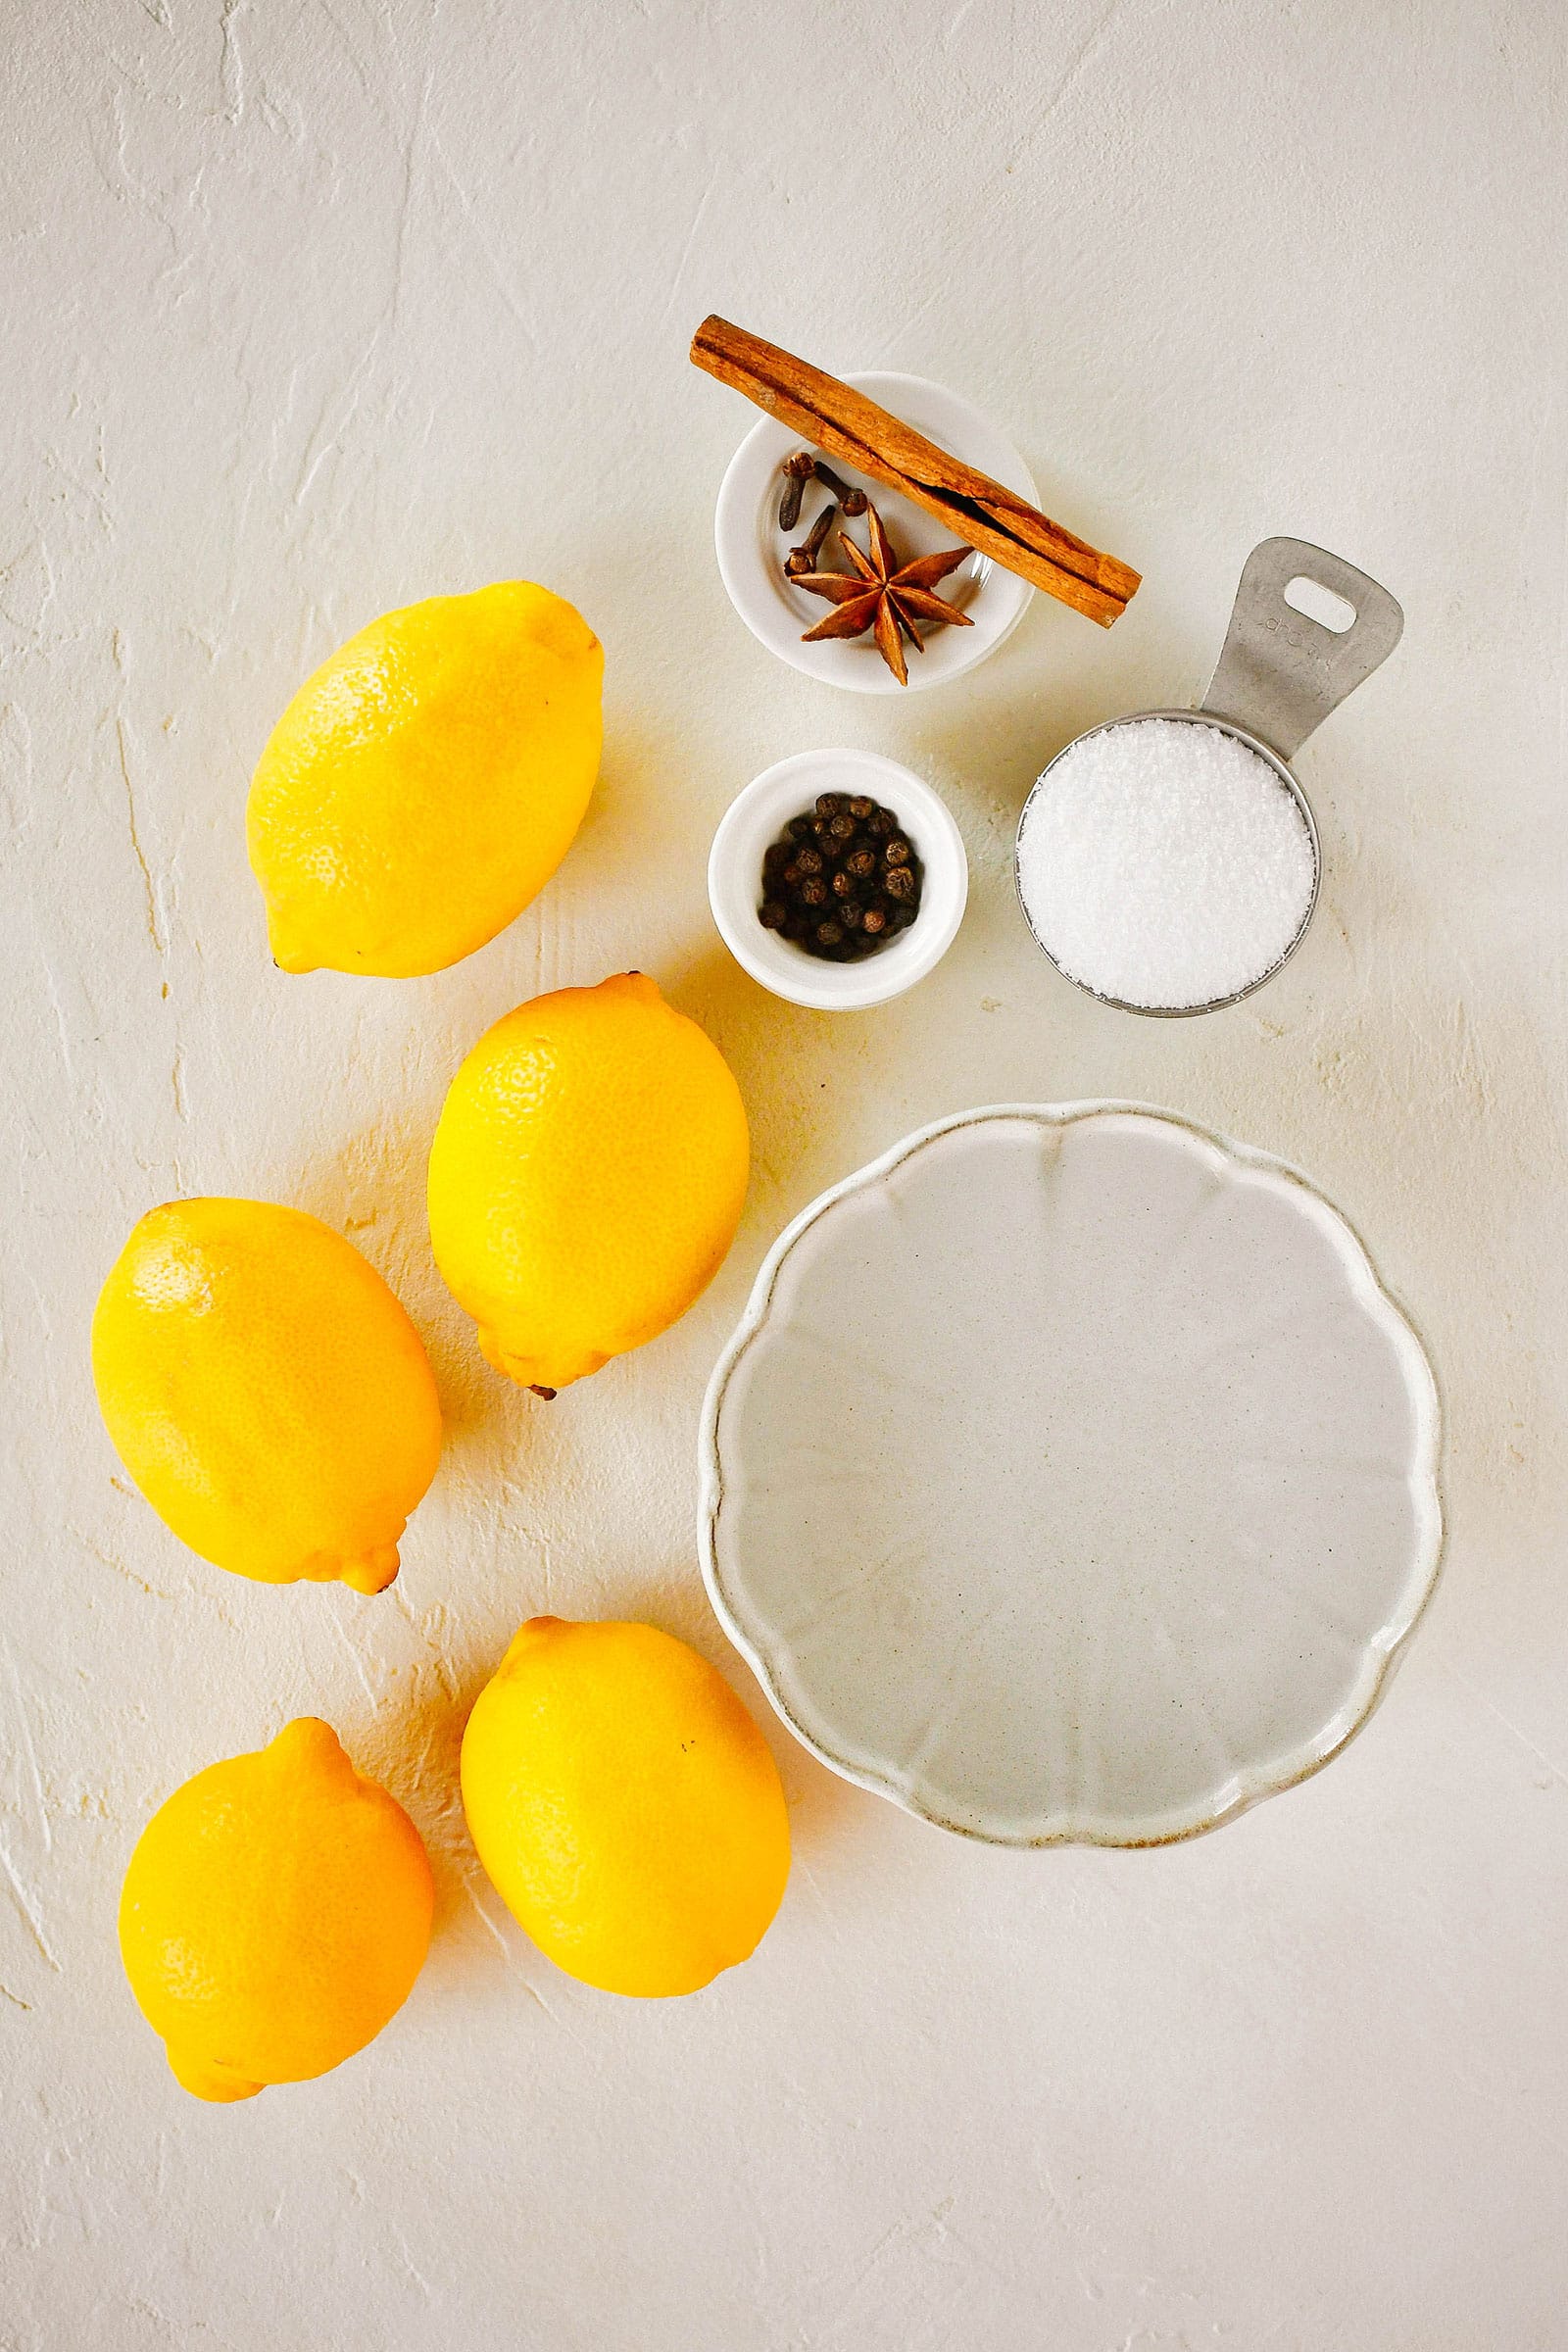 Overhead shot of a bowl of water, a measuring cup filled with salt, small dishes with various whole spices, and five lemons on a table